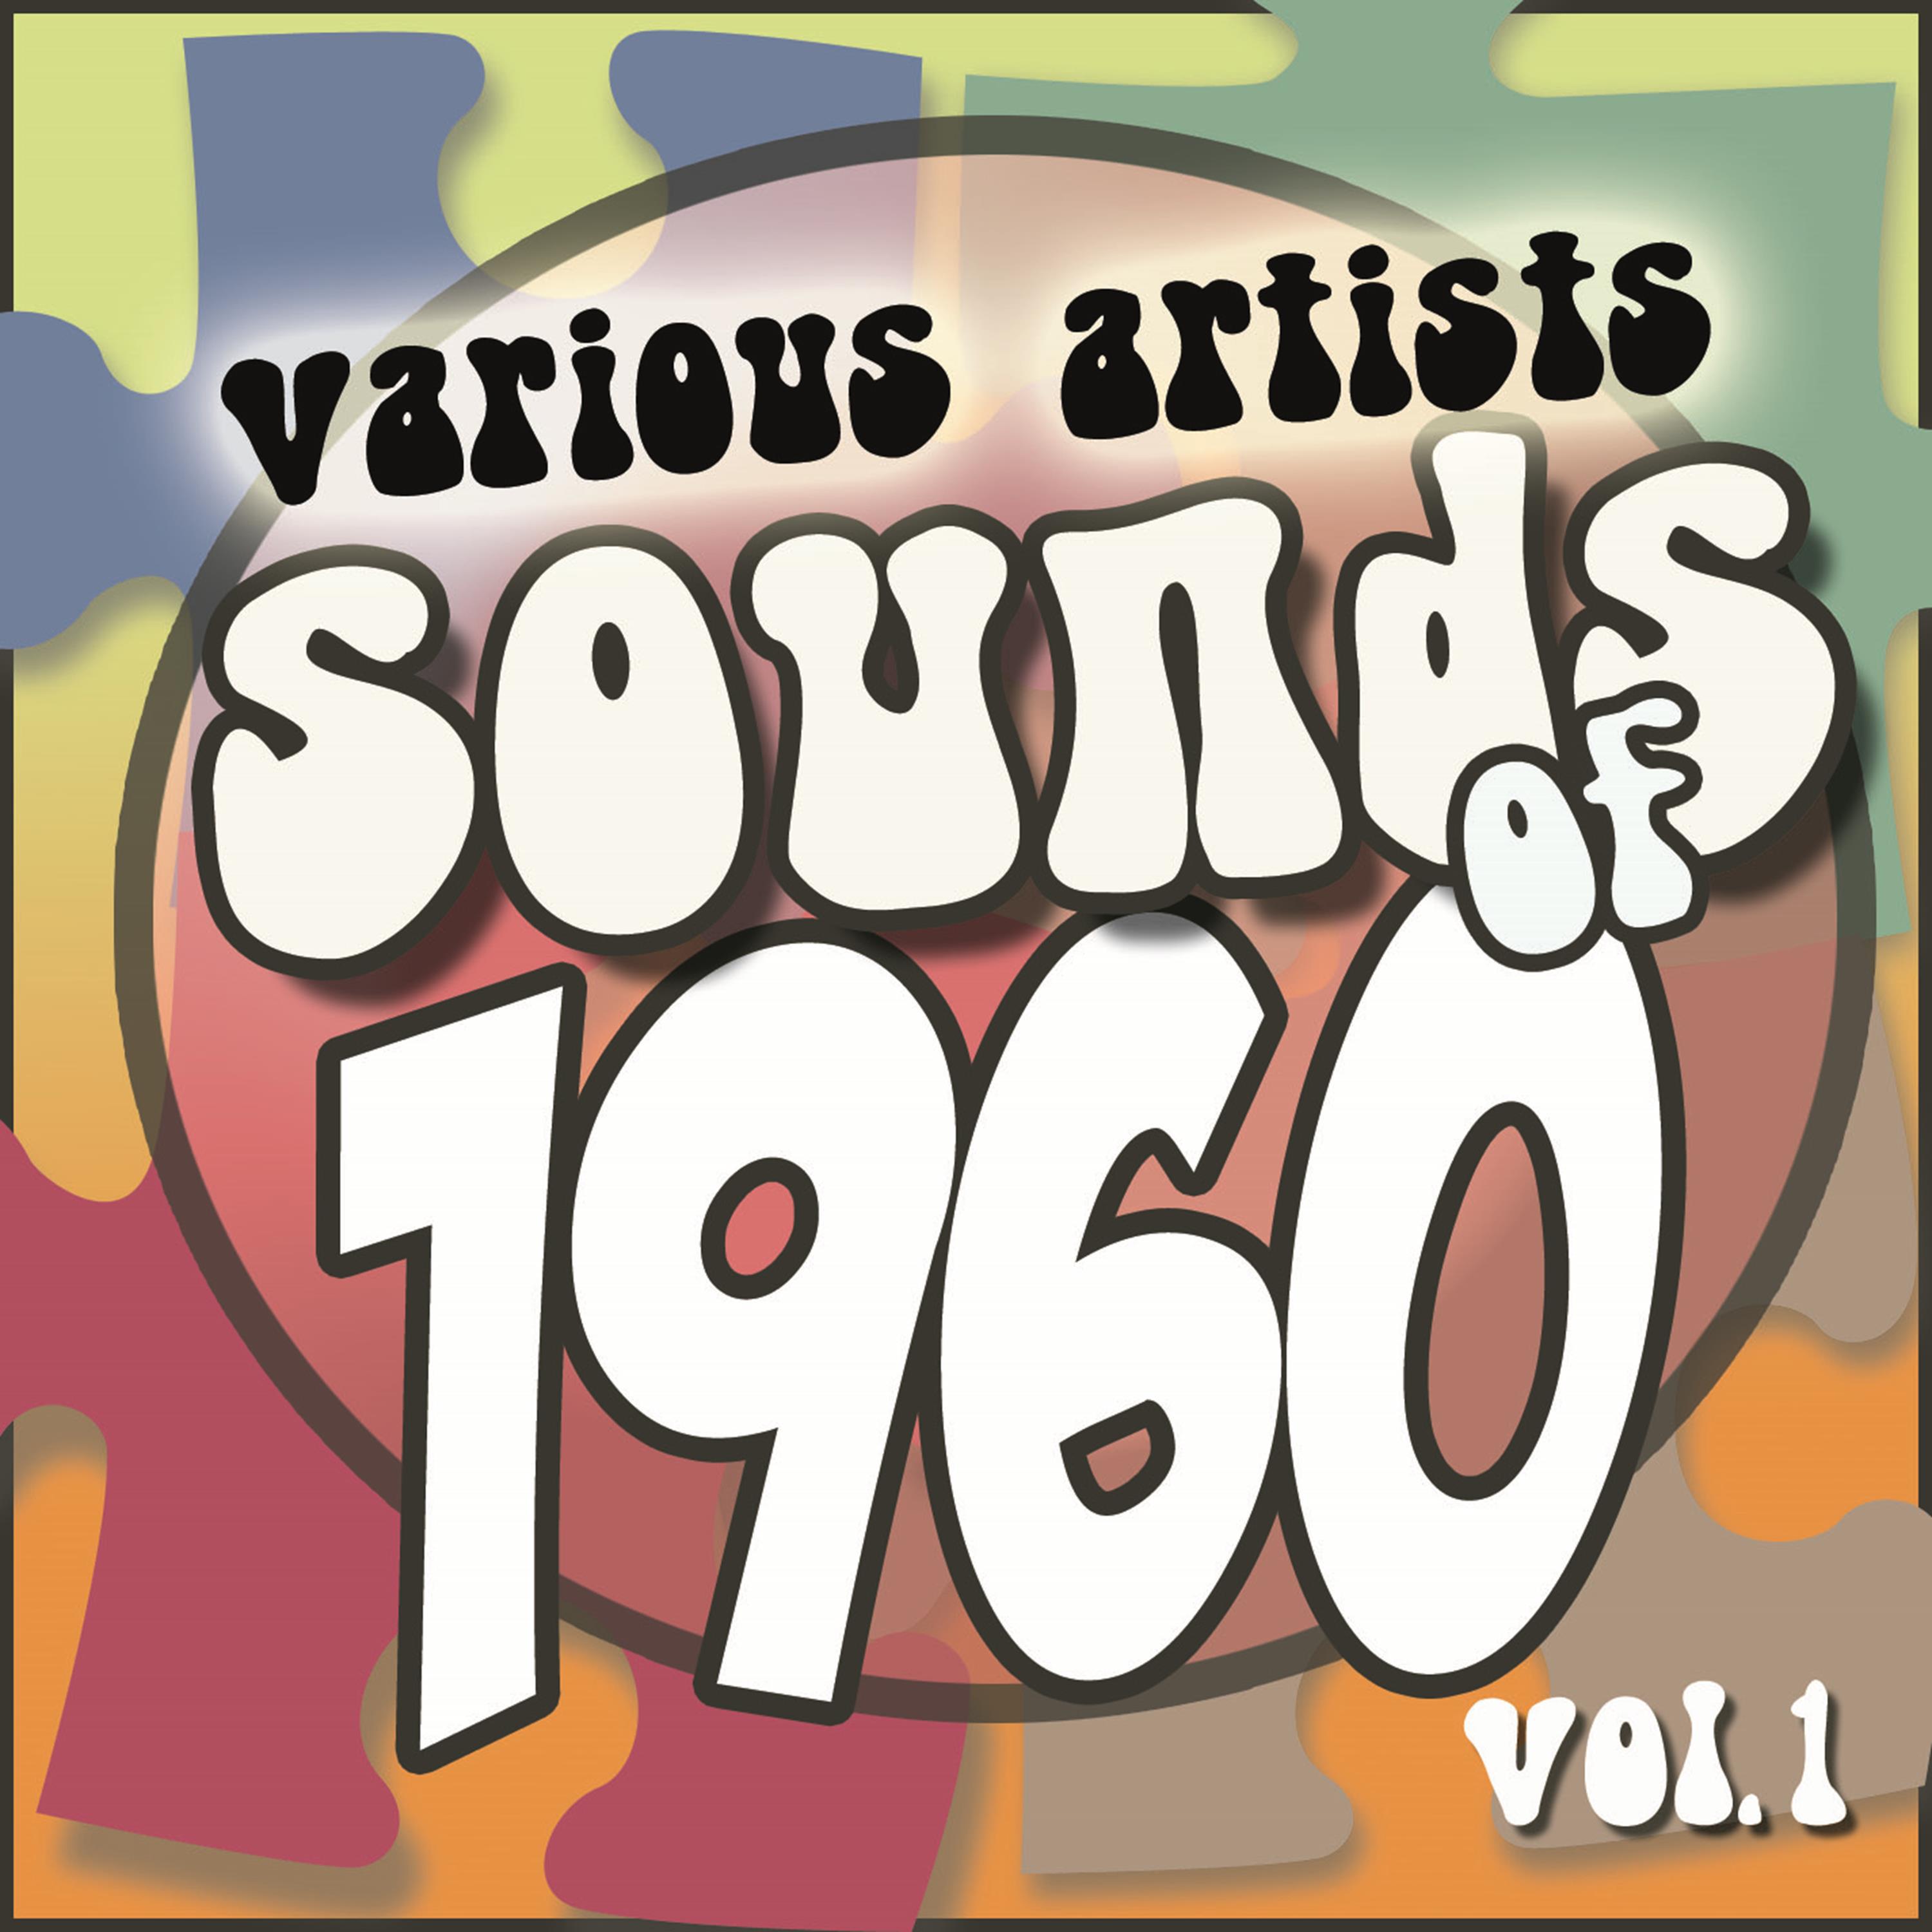 Sounds of 1960, Vol. 1 (Digitally Remastered)